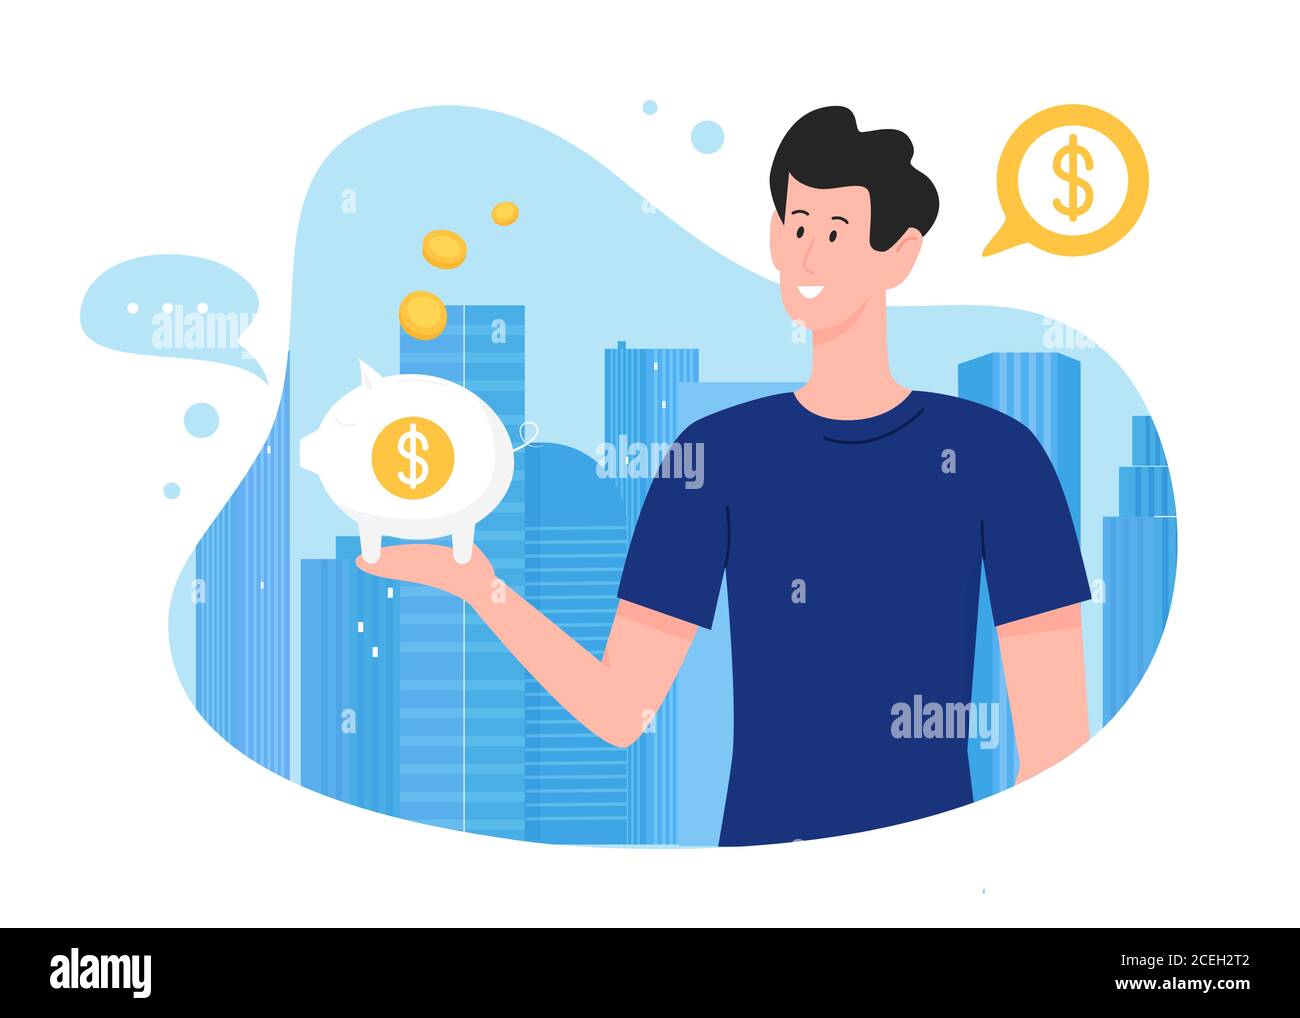 Save money vector illustration. Cartoon flat happy man investor character holding moneybox piggy bank in hand, saving or accumulating gold coins, financial investments isolated on white Stock Vector